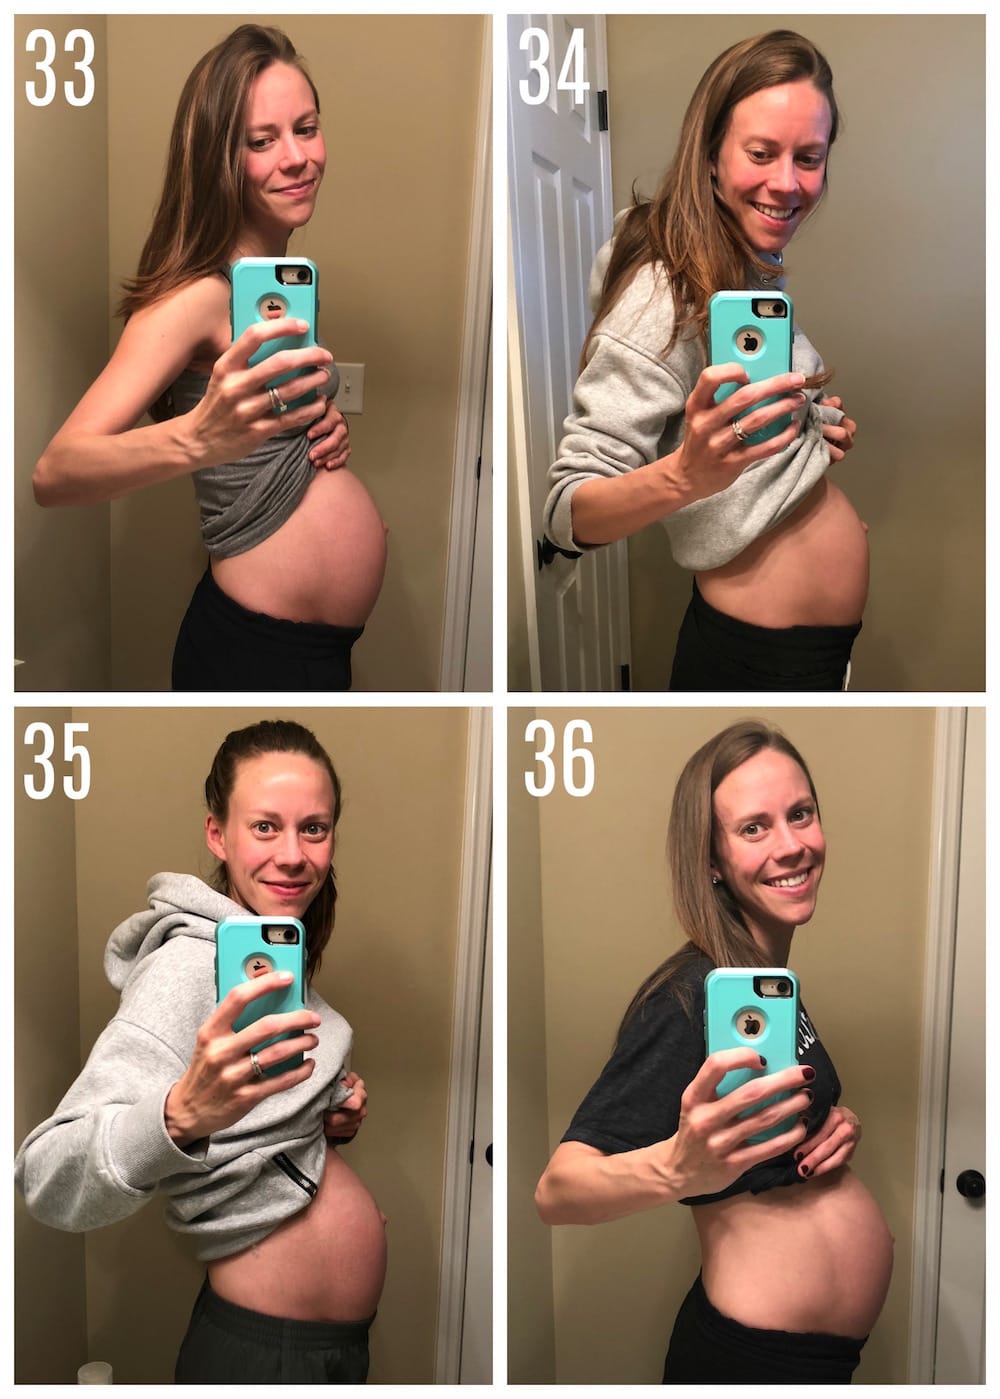 Faith's baby bump from 34 to 36 weeks